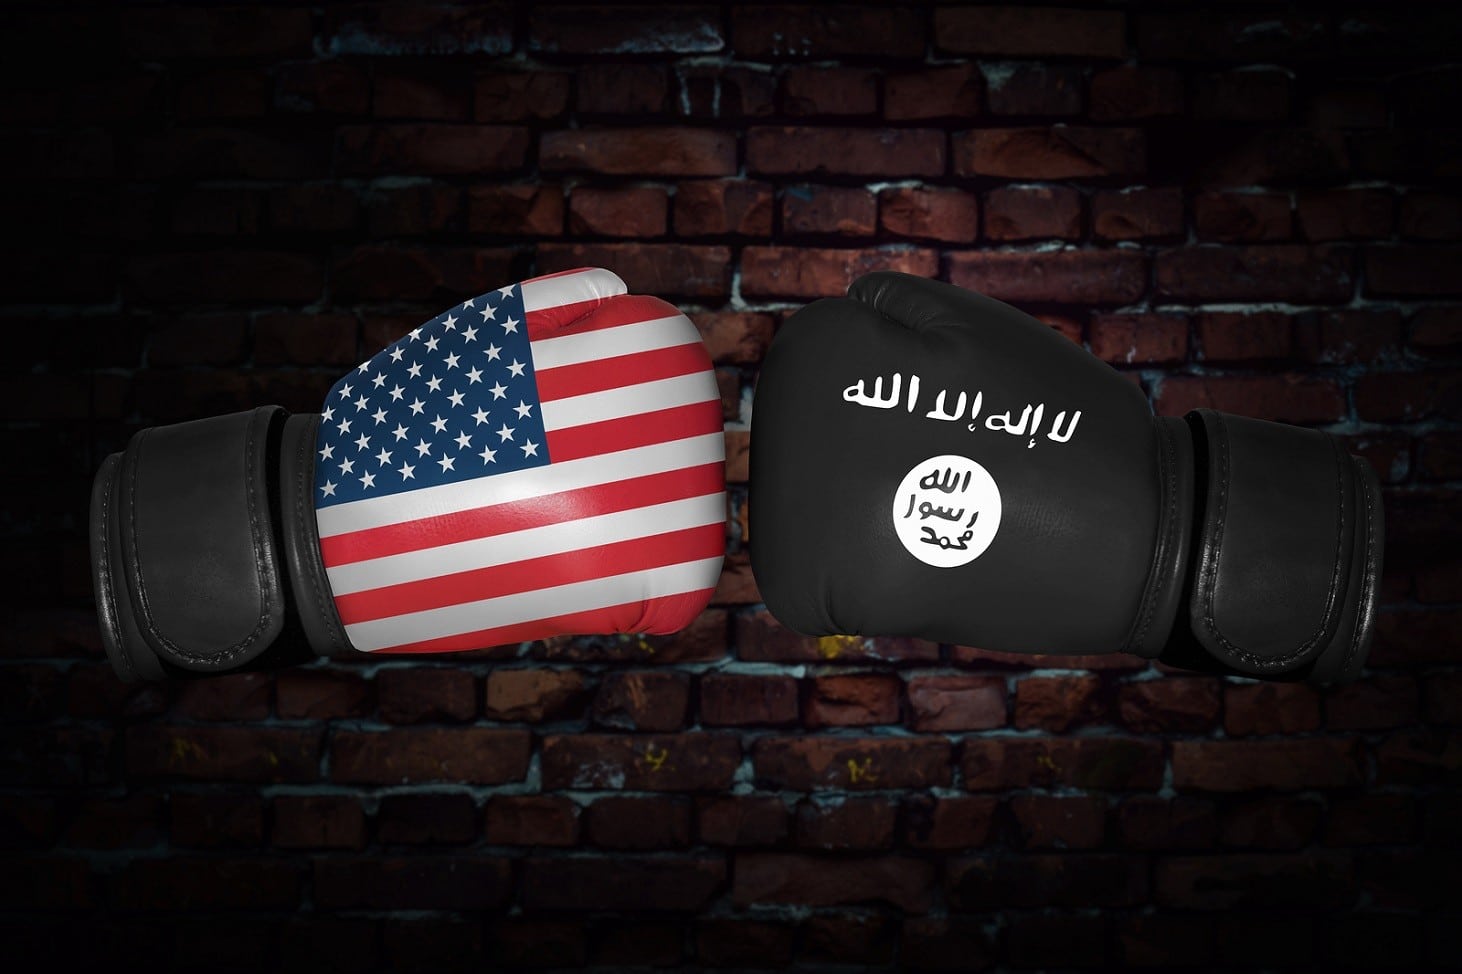 A boxing match. Confrontation between the USA and ISIS. Islamic state and American national flags on Boxing gloves. Sports competition between the two countries. foreign policy conflict.